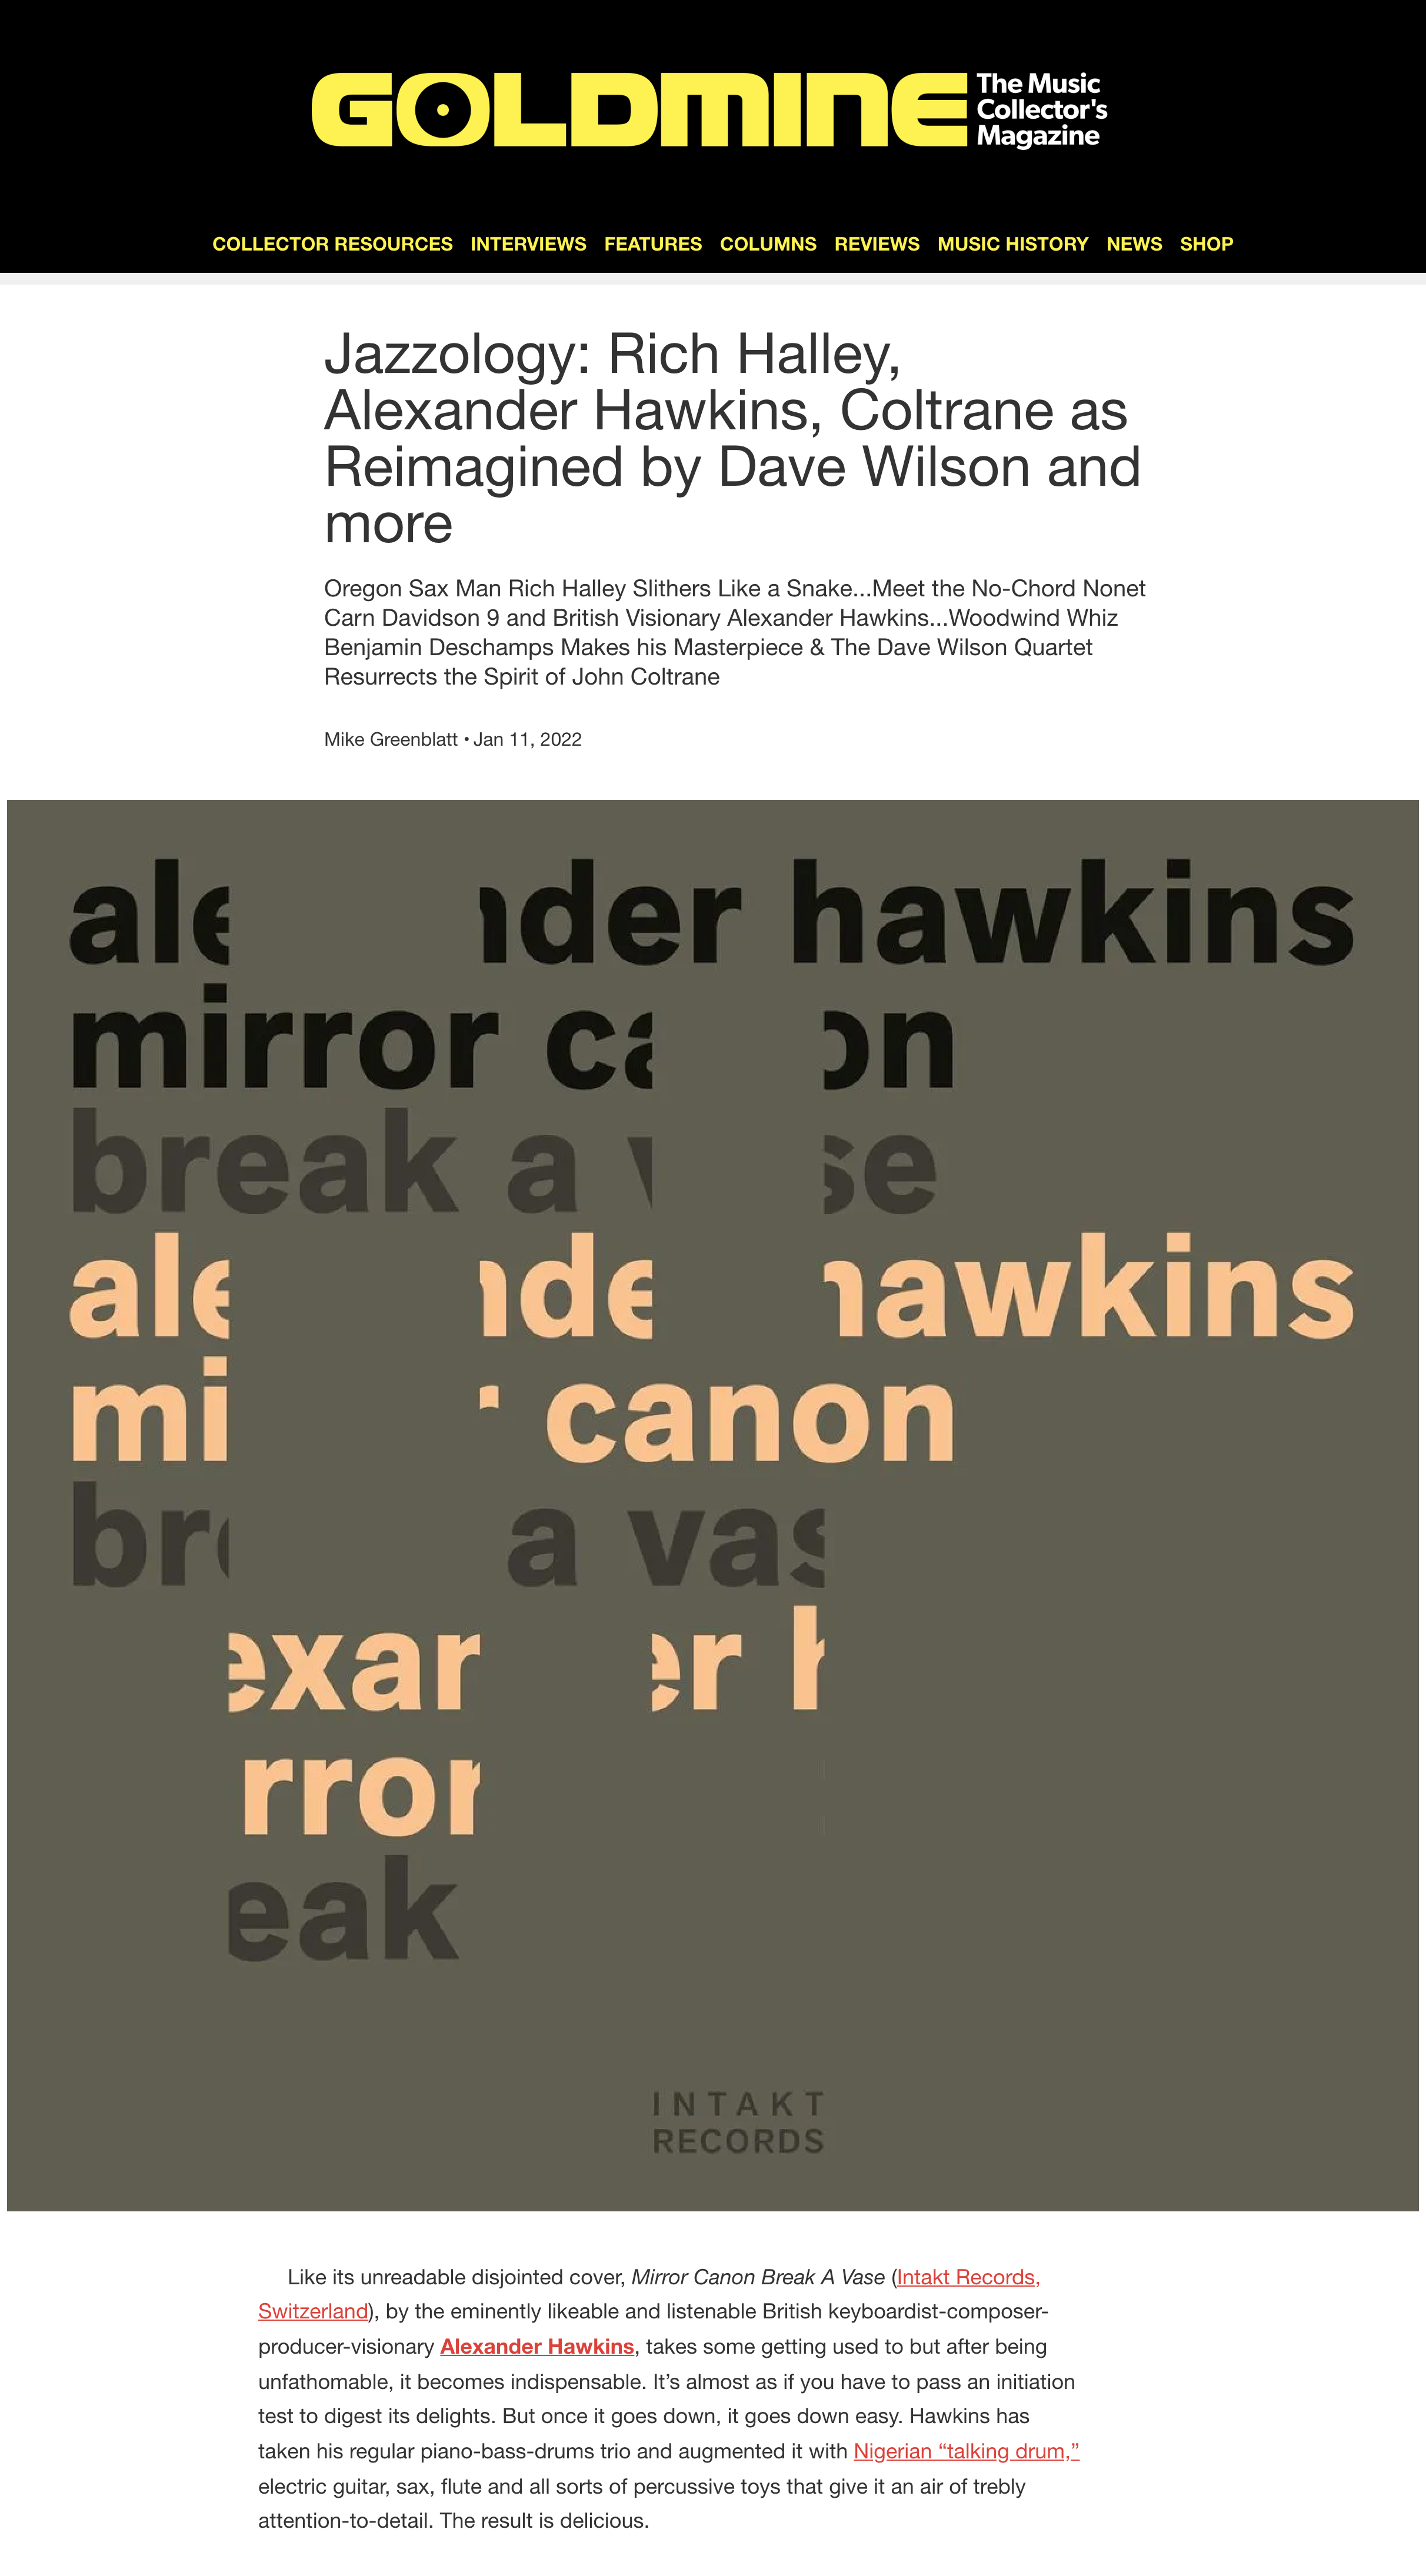 Like its unreadable disjointed cover, Mirror Canon Break A Vase (Intakt Records, Switzerland), by the eminently likeable and listenable British keyboardist-composer-producer-visionary Alexander Hawkins, takes some getting used to but after being unfathomable, it becomes indispensable. It’s almost as if you have to pass an initiation test to digest its delights. But once it goes down, it goes down easy. Hawkins has taken his regular piano-bass-drums trio and augmented it with Nigerian “talking drum,” electric guitar, sax, flute and all sorts of percussive toys that give it an air of trebly attention-to-detail. The result is delicious.